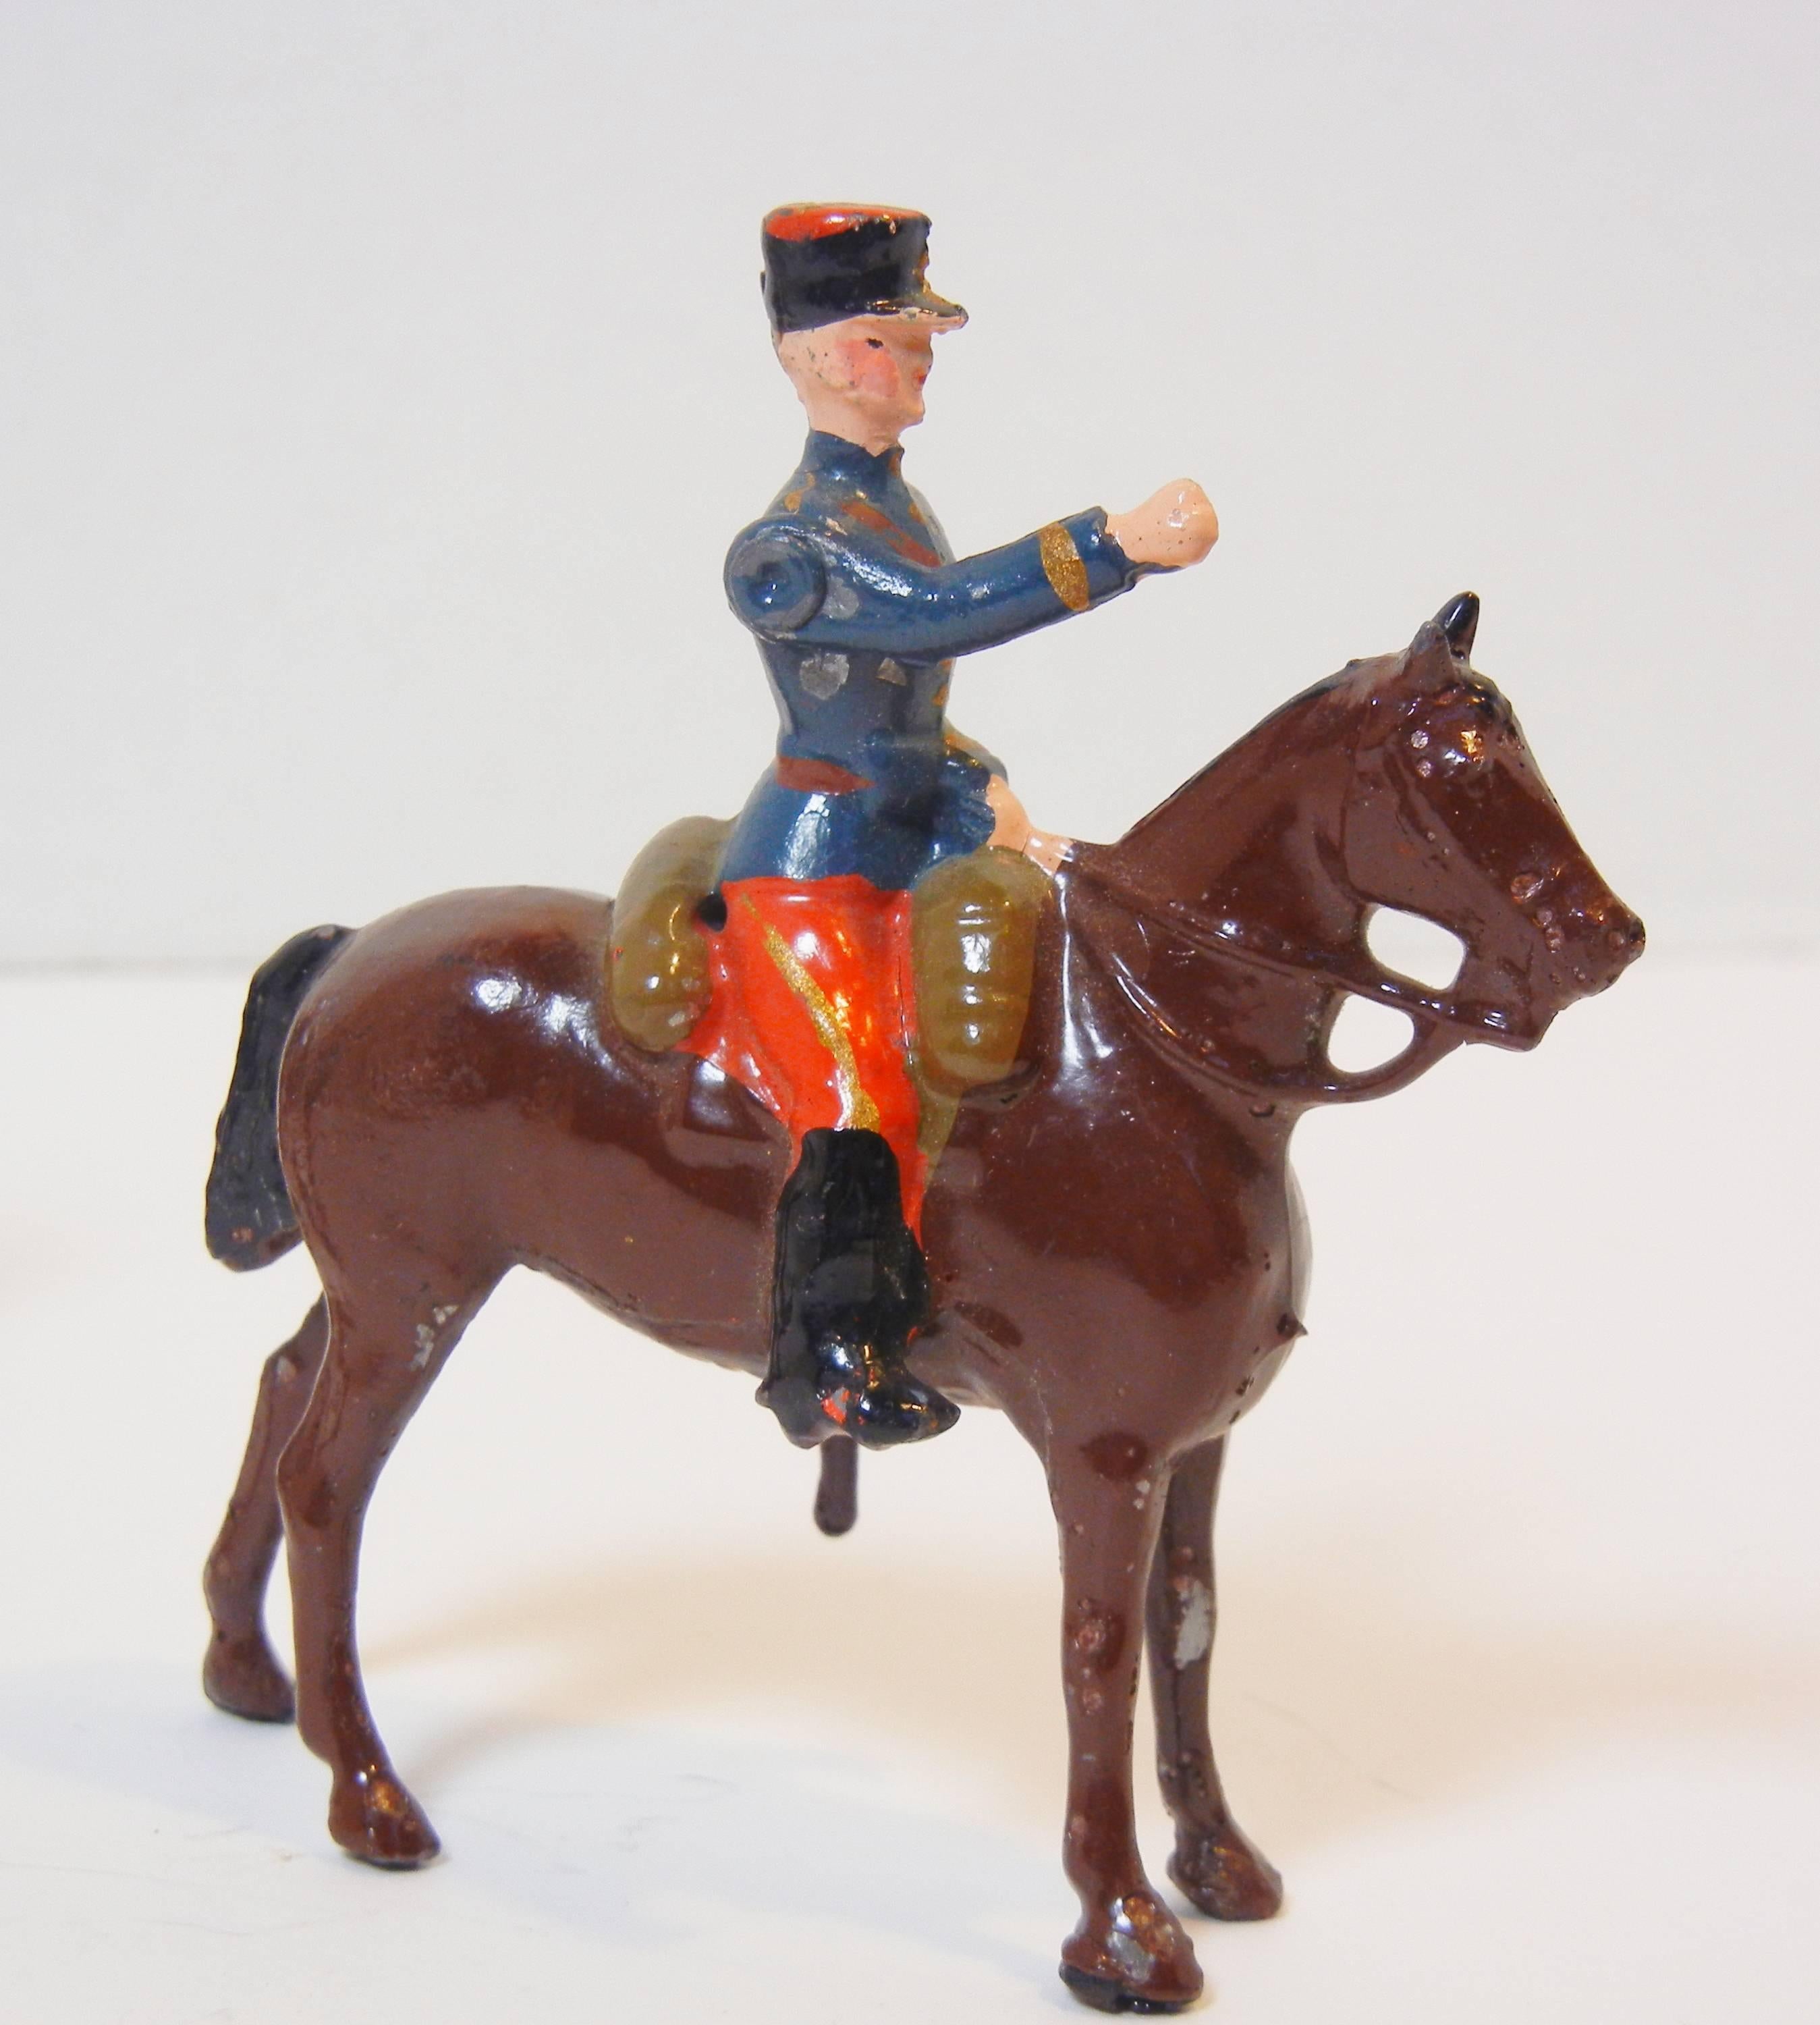 Hand-Painted French Foreign Legion, Vintage Toy Soldiers by W. Britain Ltd